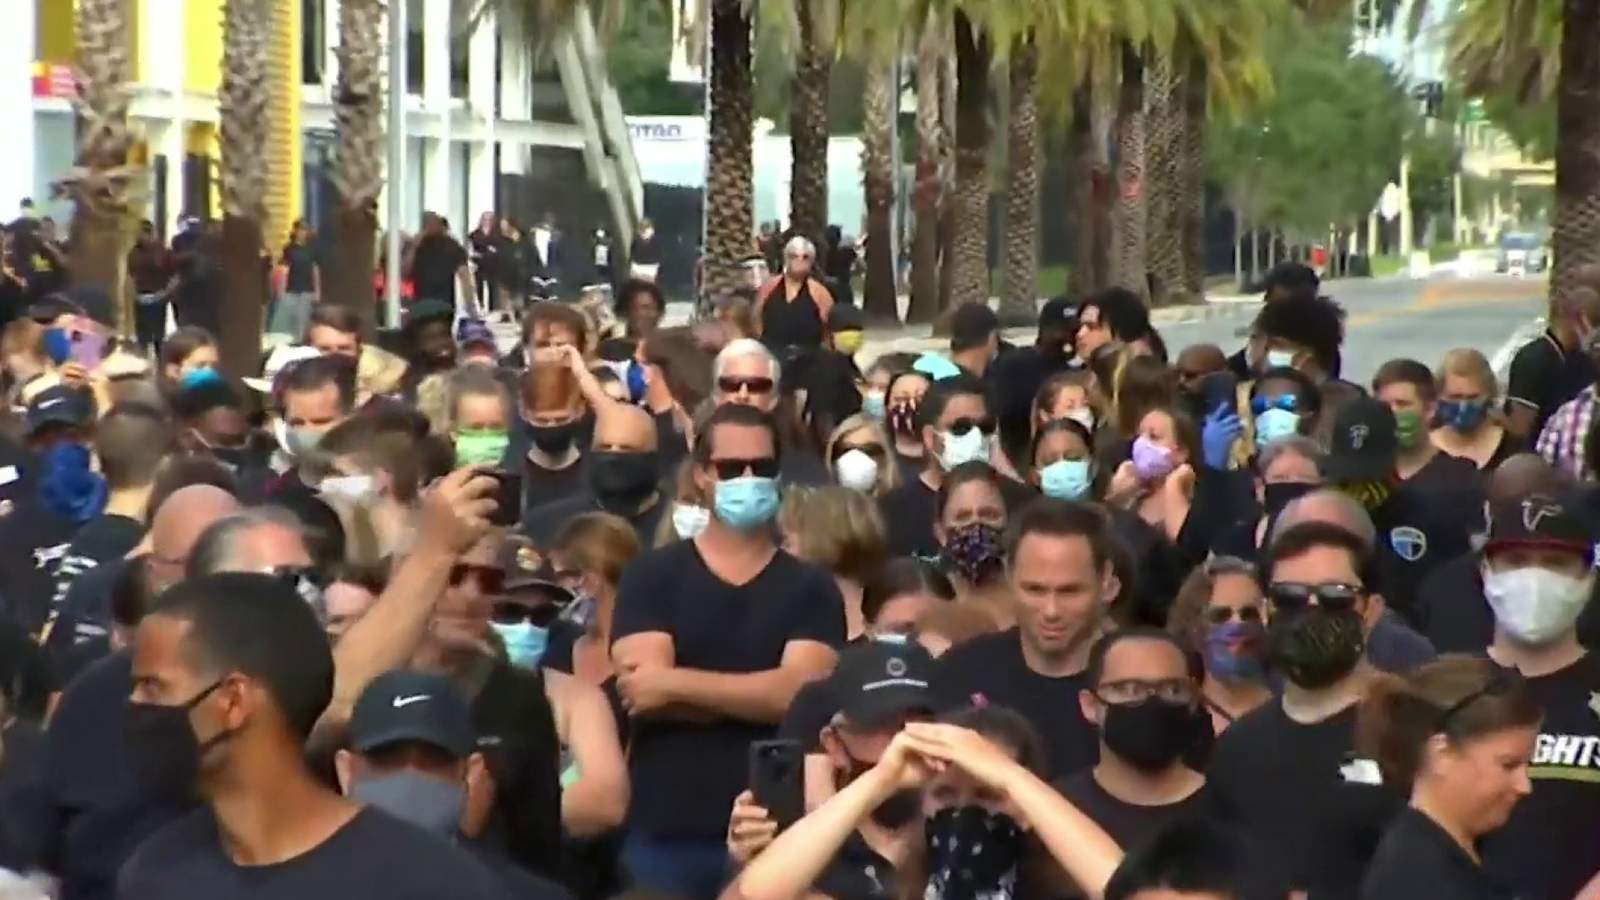 Church leaders join hundreds of participants during ‘Walk of Mourning’